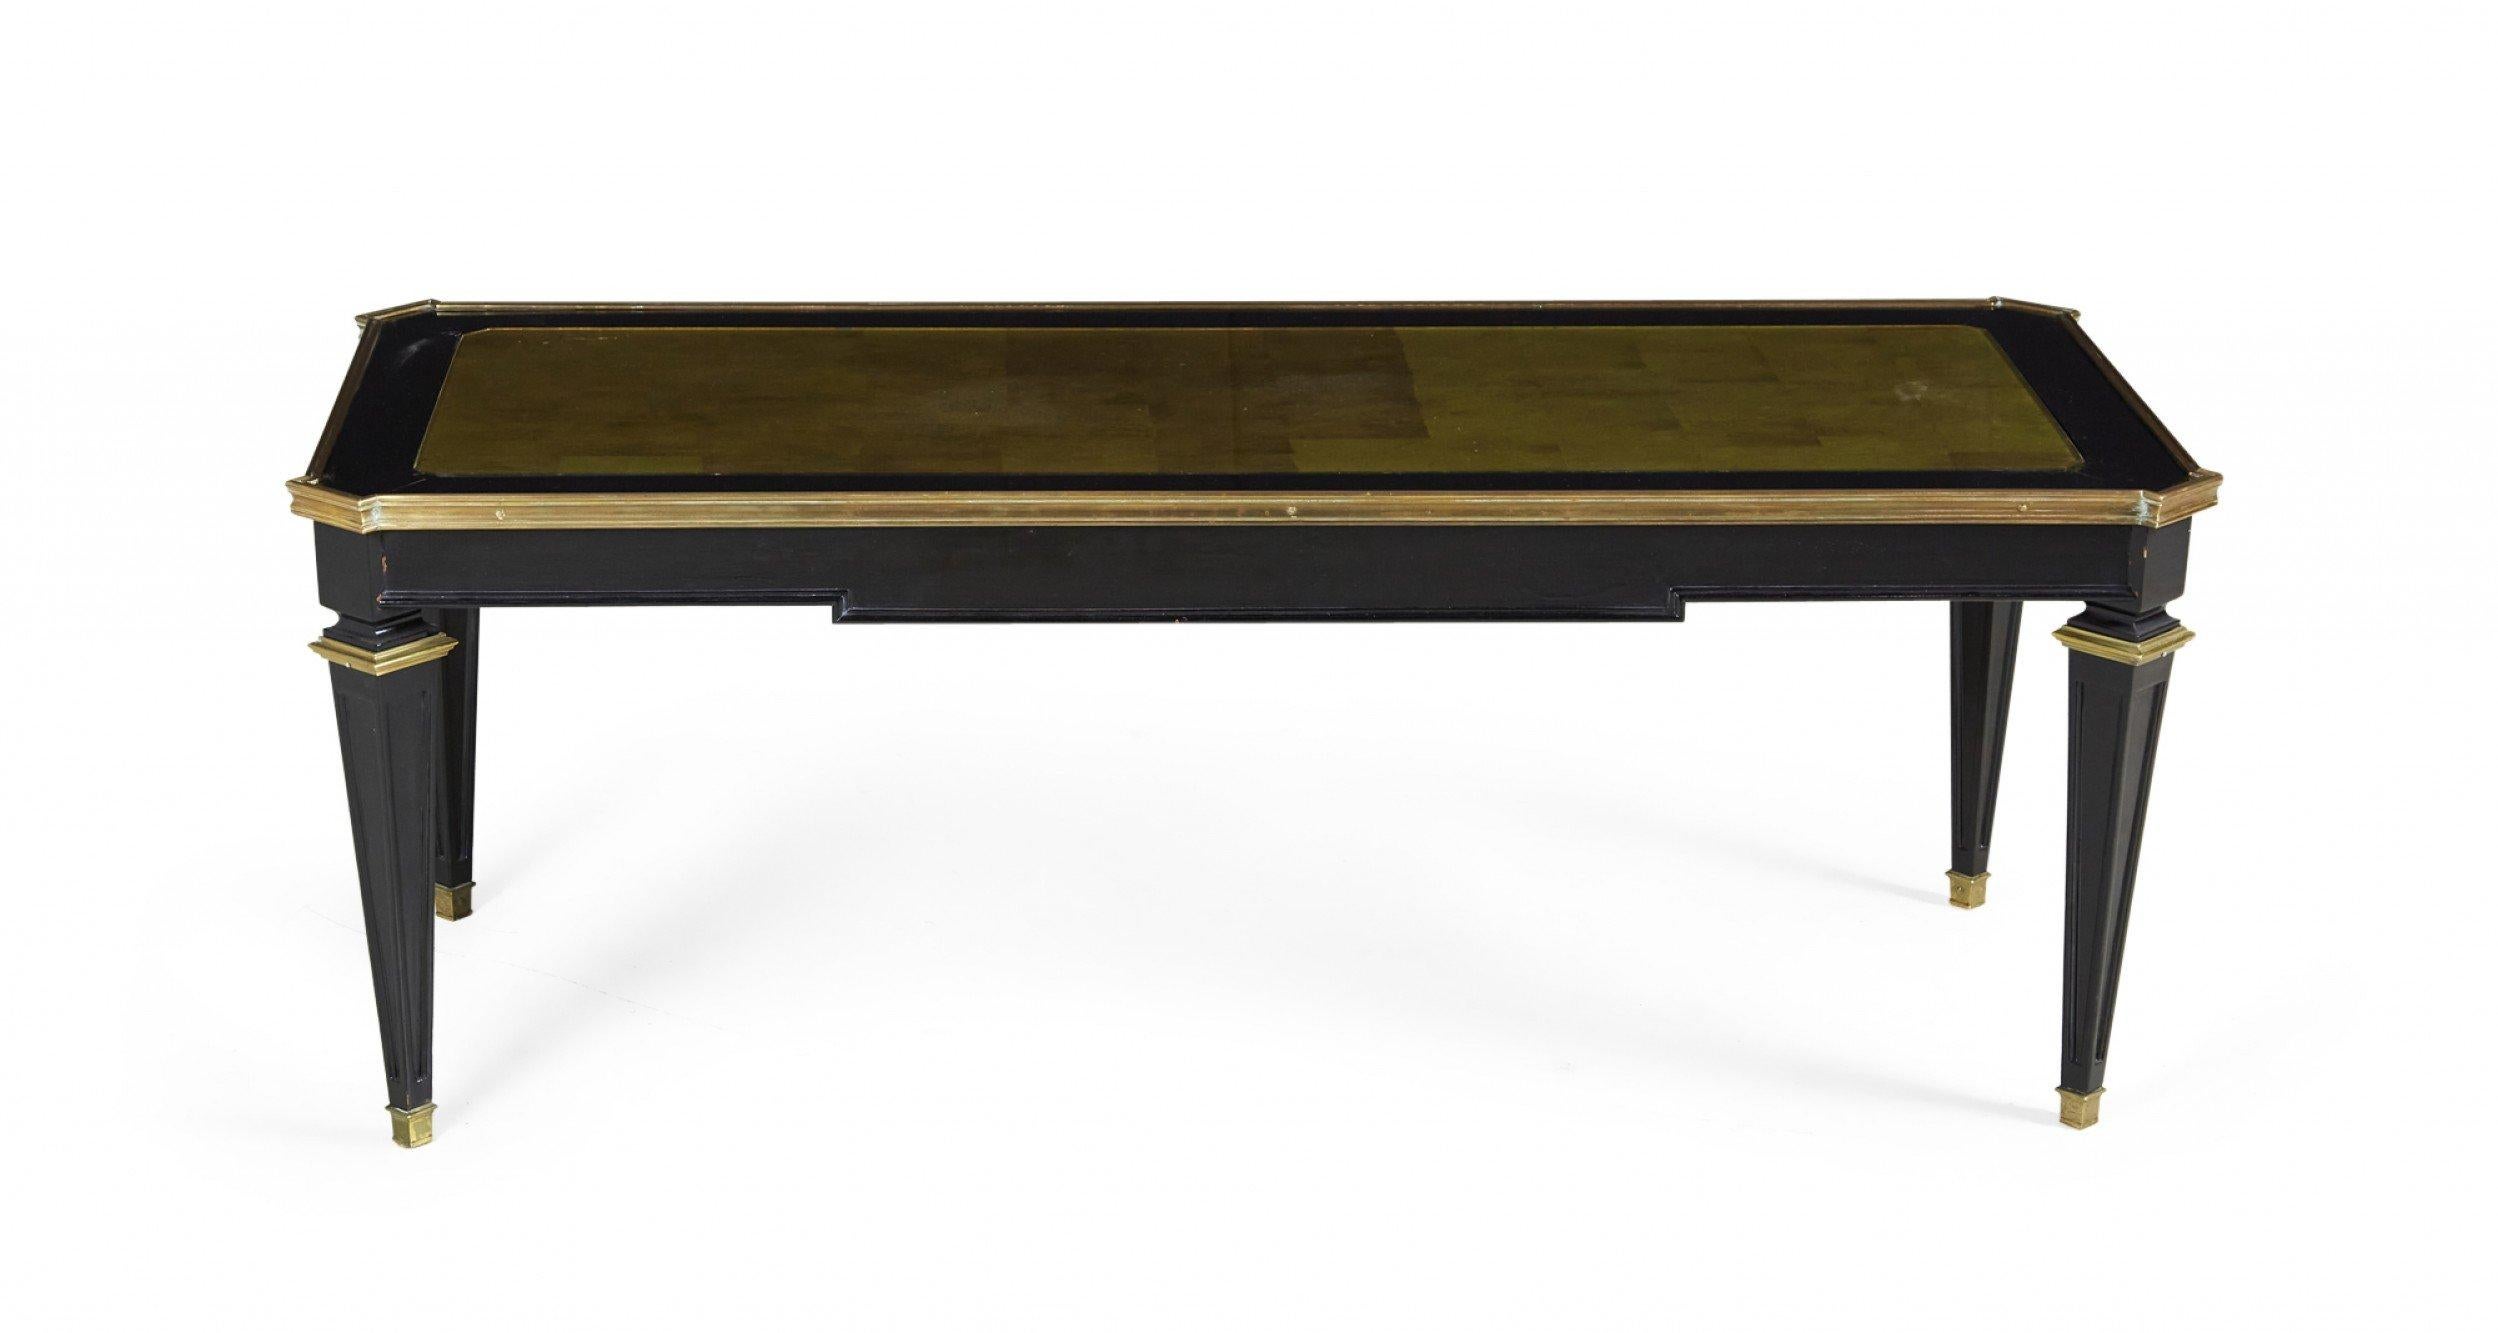 French mid-century (1940s) ebonized wooden coffee table with gilt painted trim, an inset gold glass top with geometric pattern, and four tapered square legs ending in brass sabots. (Maison Jansen).
  